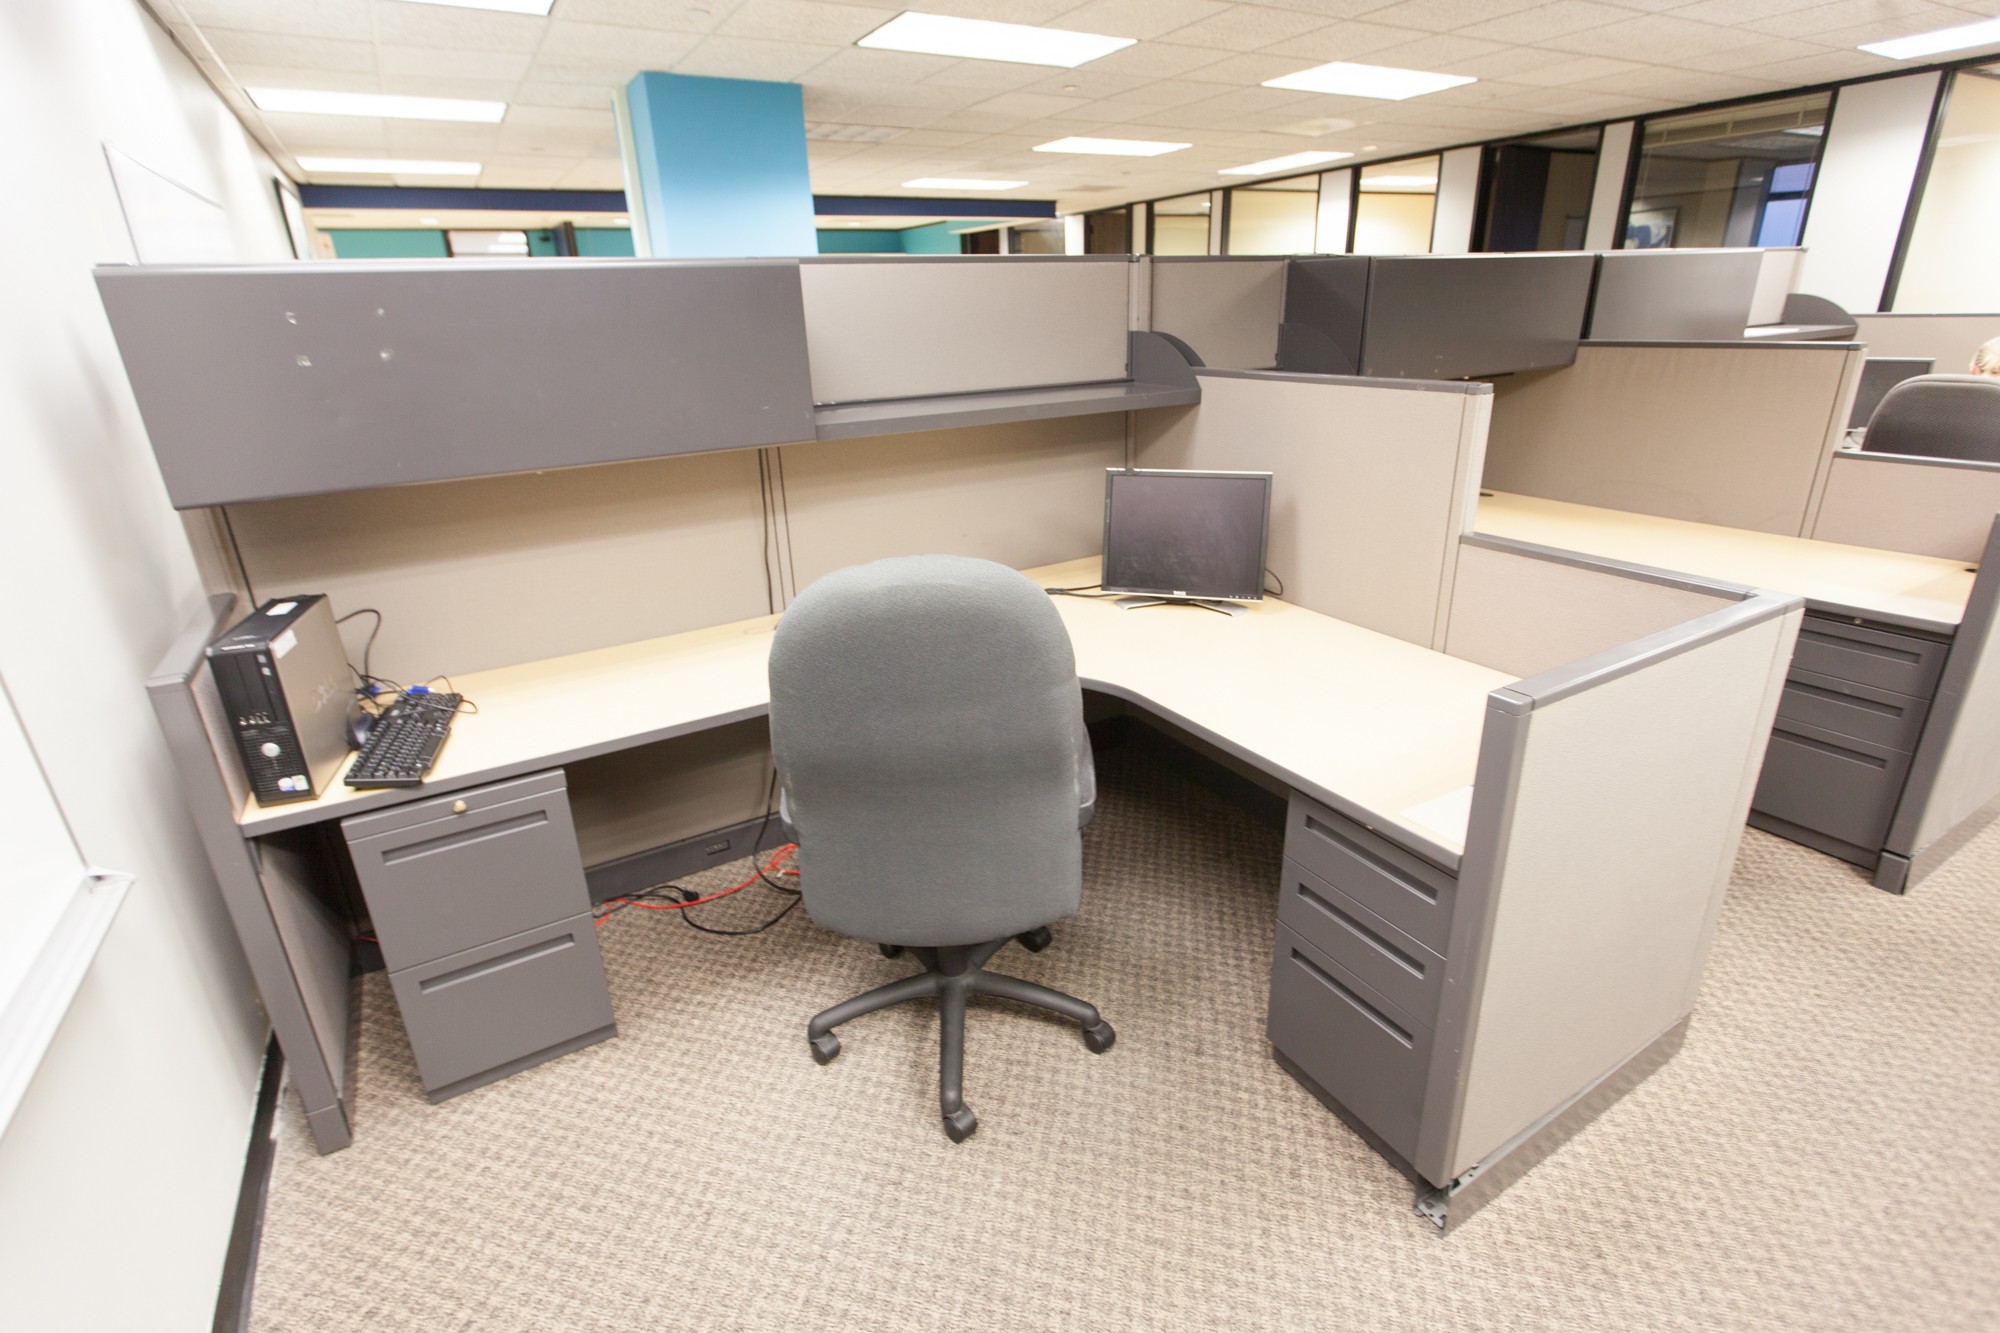 Steelcase Cubicles for Offices-1203